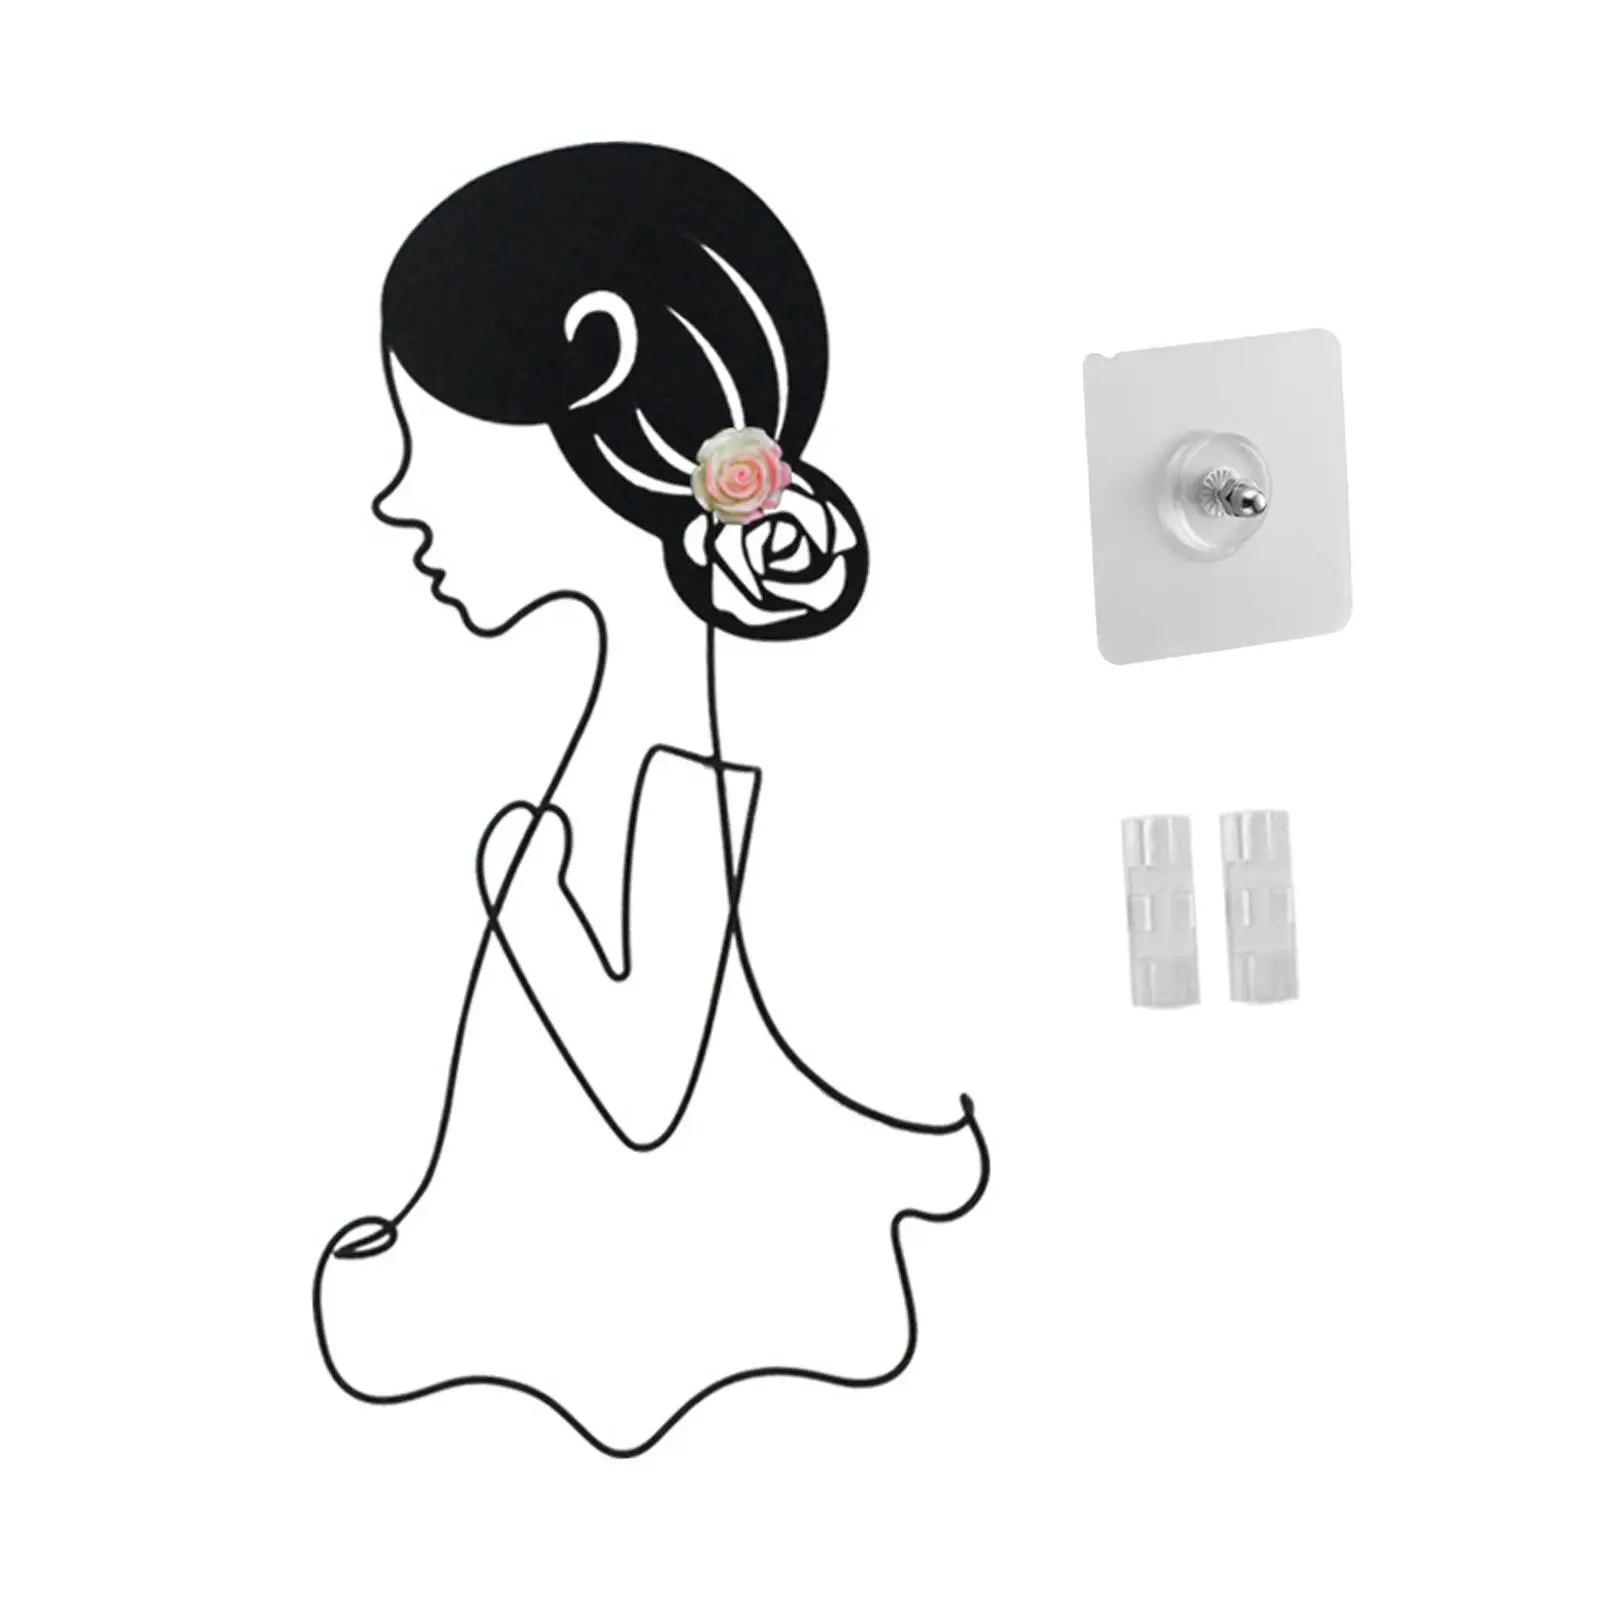 Silhouette Wall Sculptures Minimalist Wall Arts Girl Metal Wall Art Decor Wall Hanger for Laundry Entryway Hats Bags Hair Clips